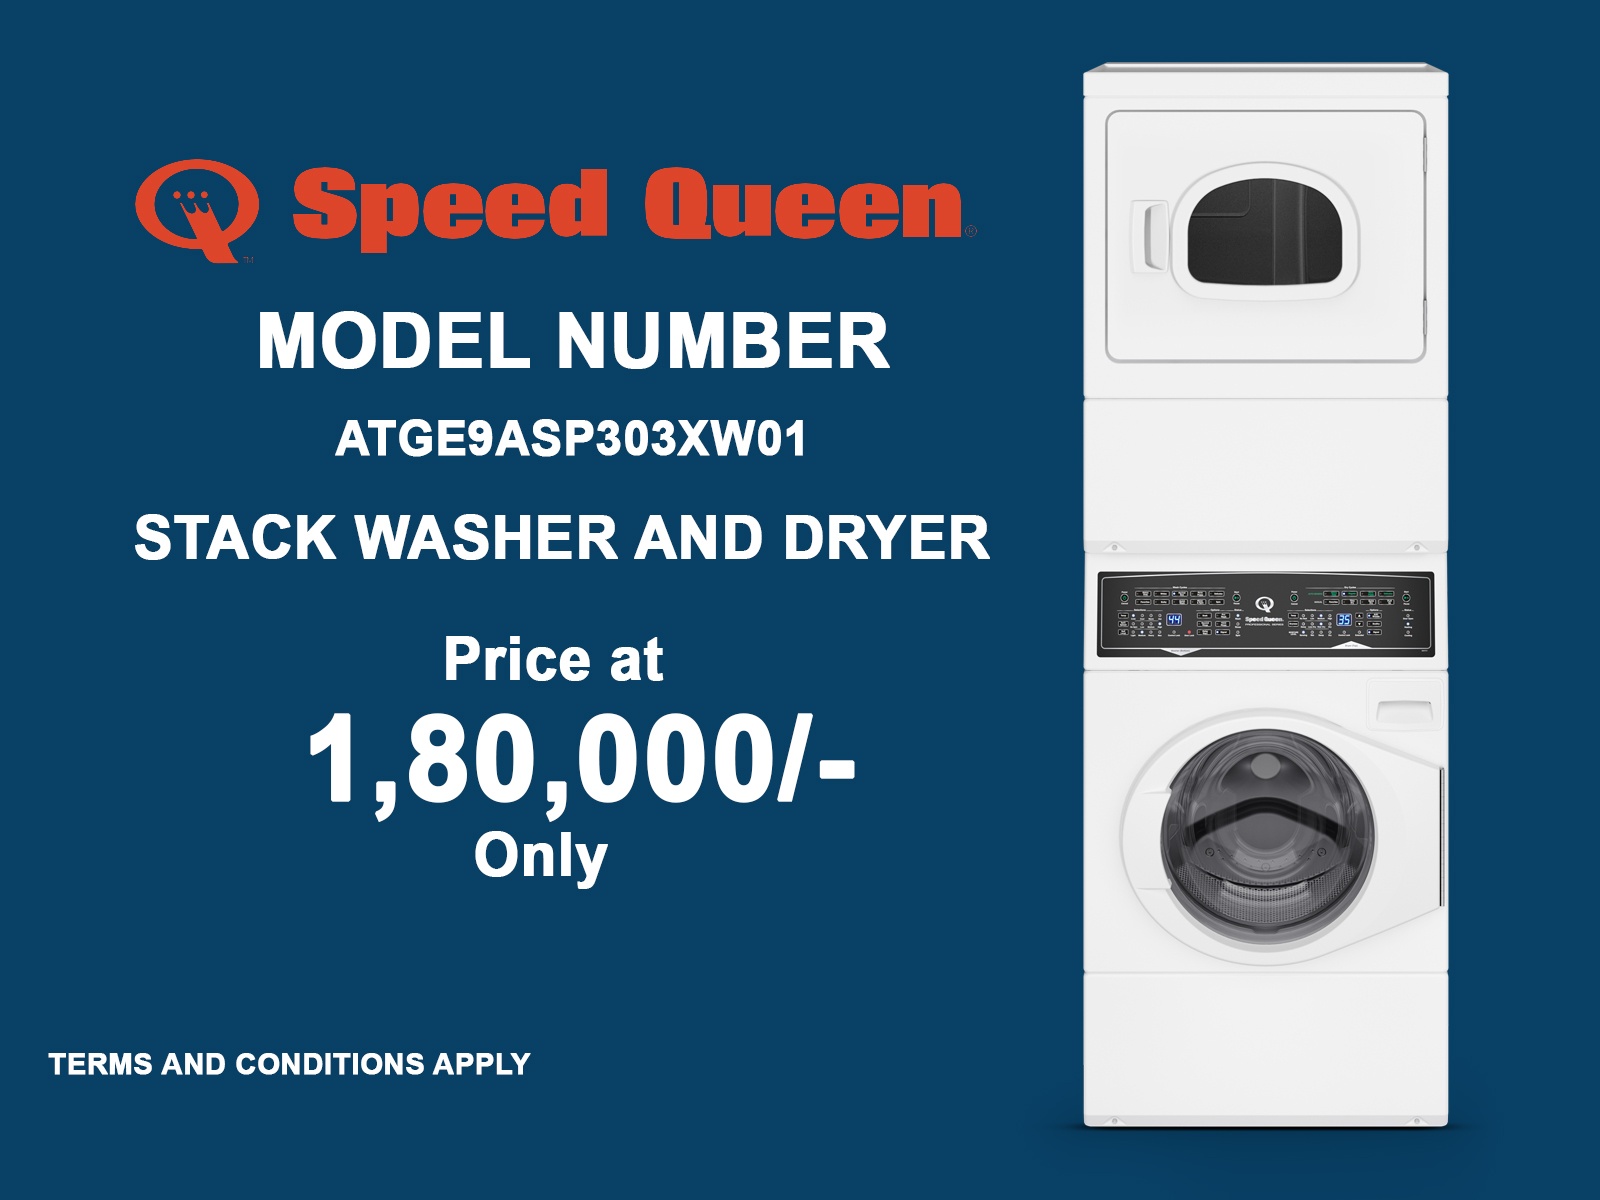 Stack Washer and Dryer